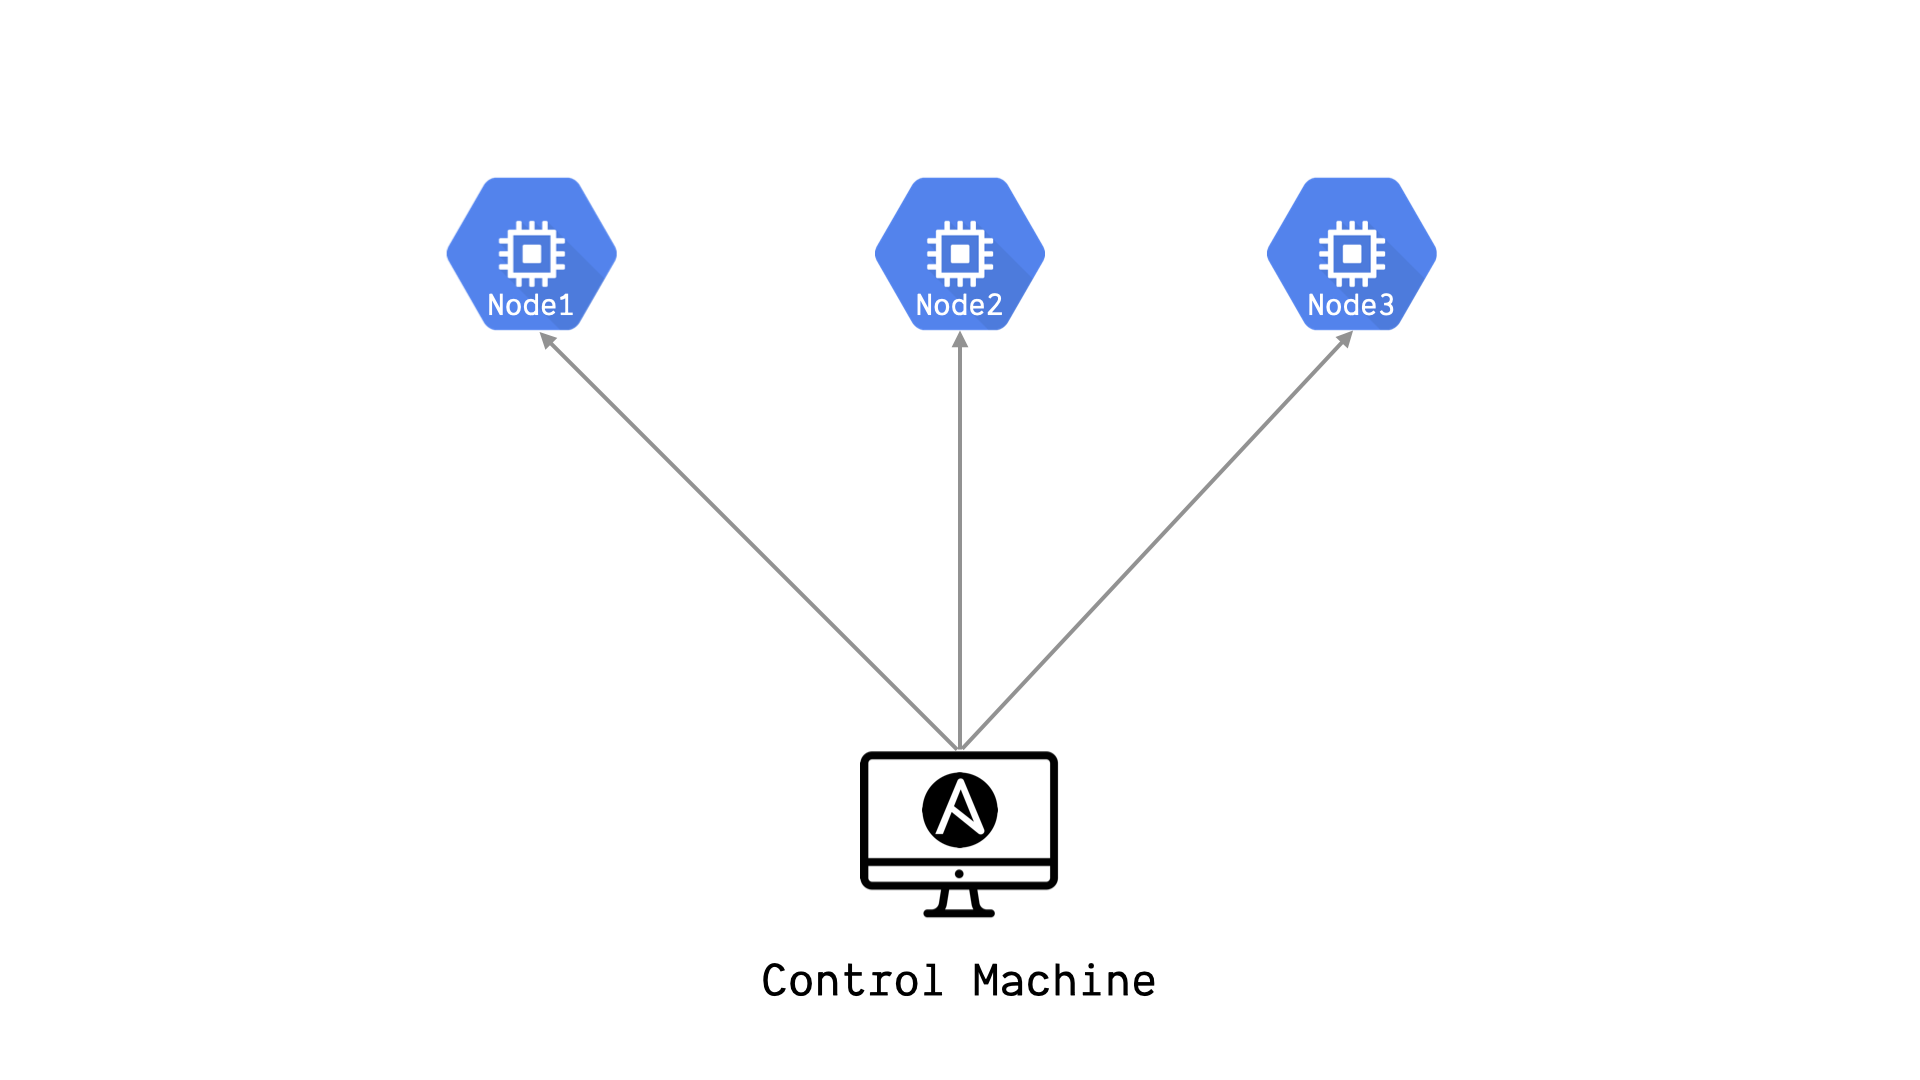 Ansible control machine and nodes